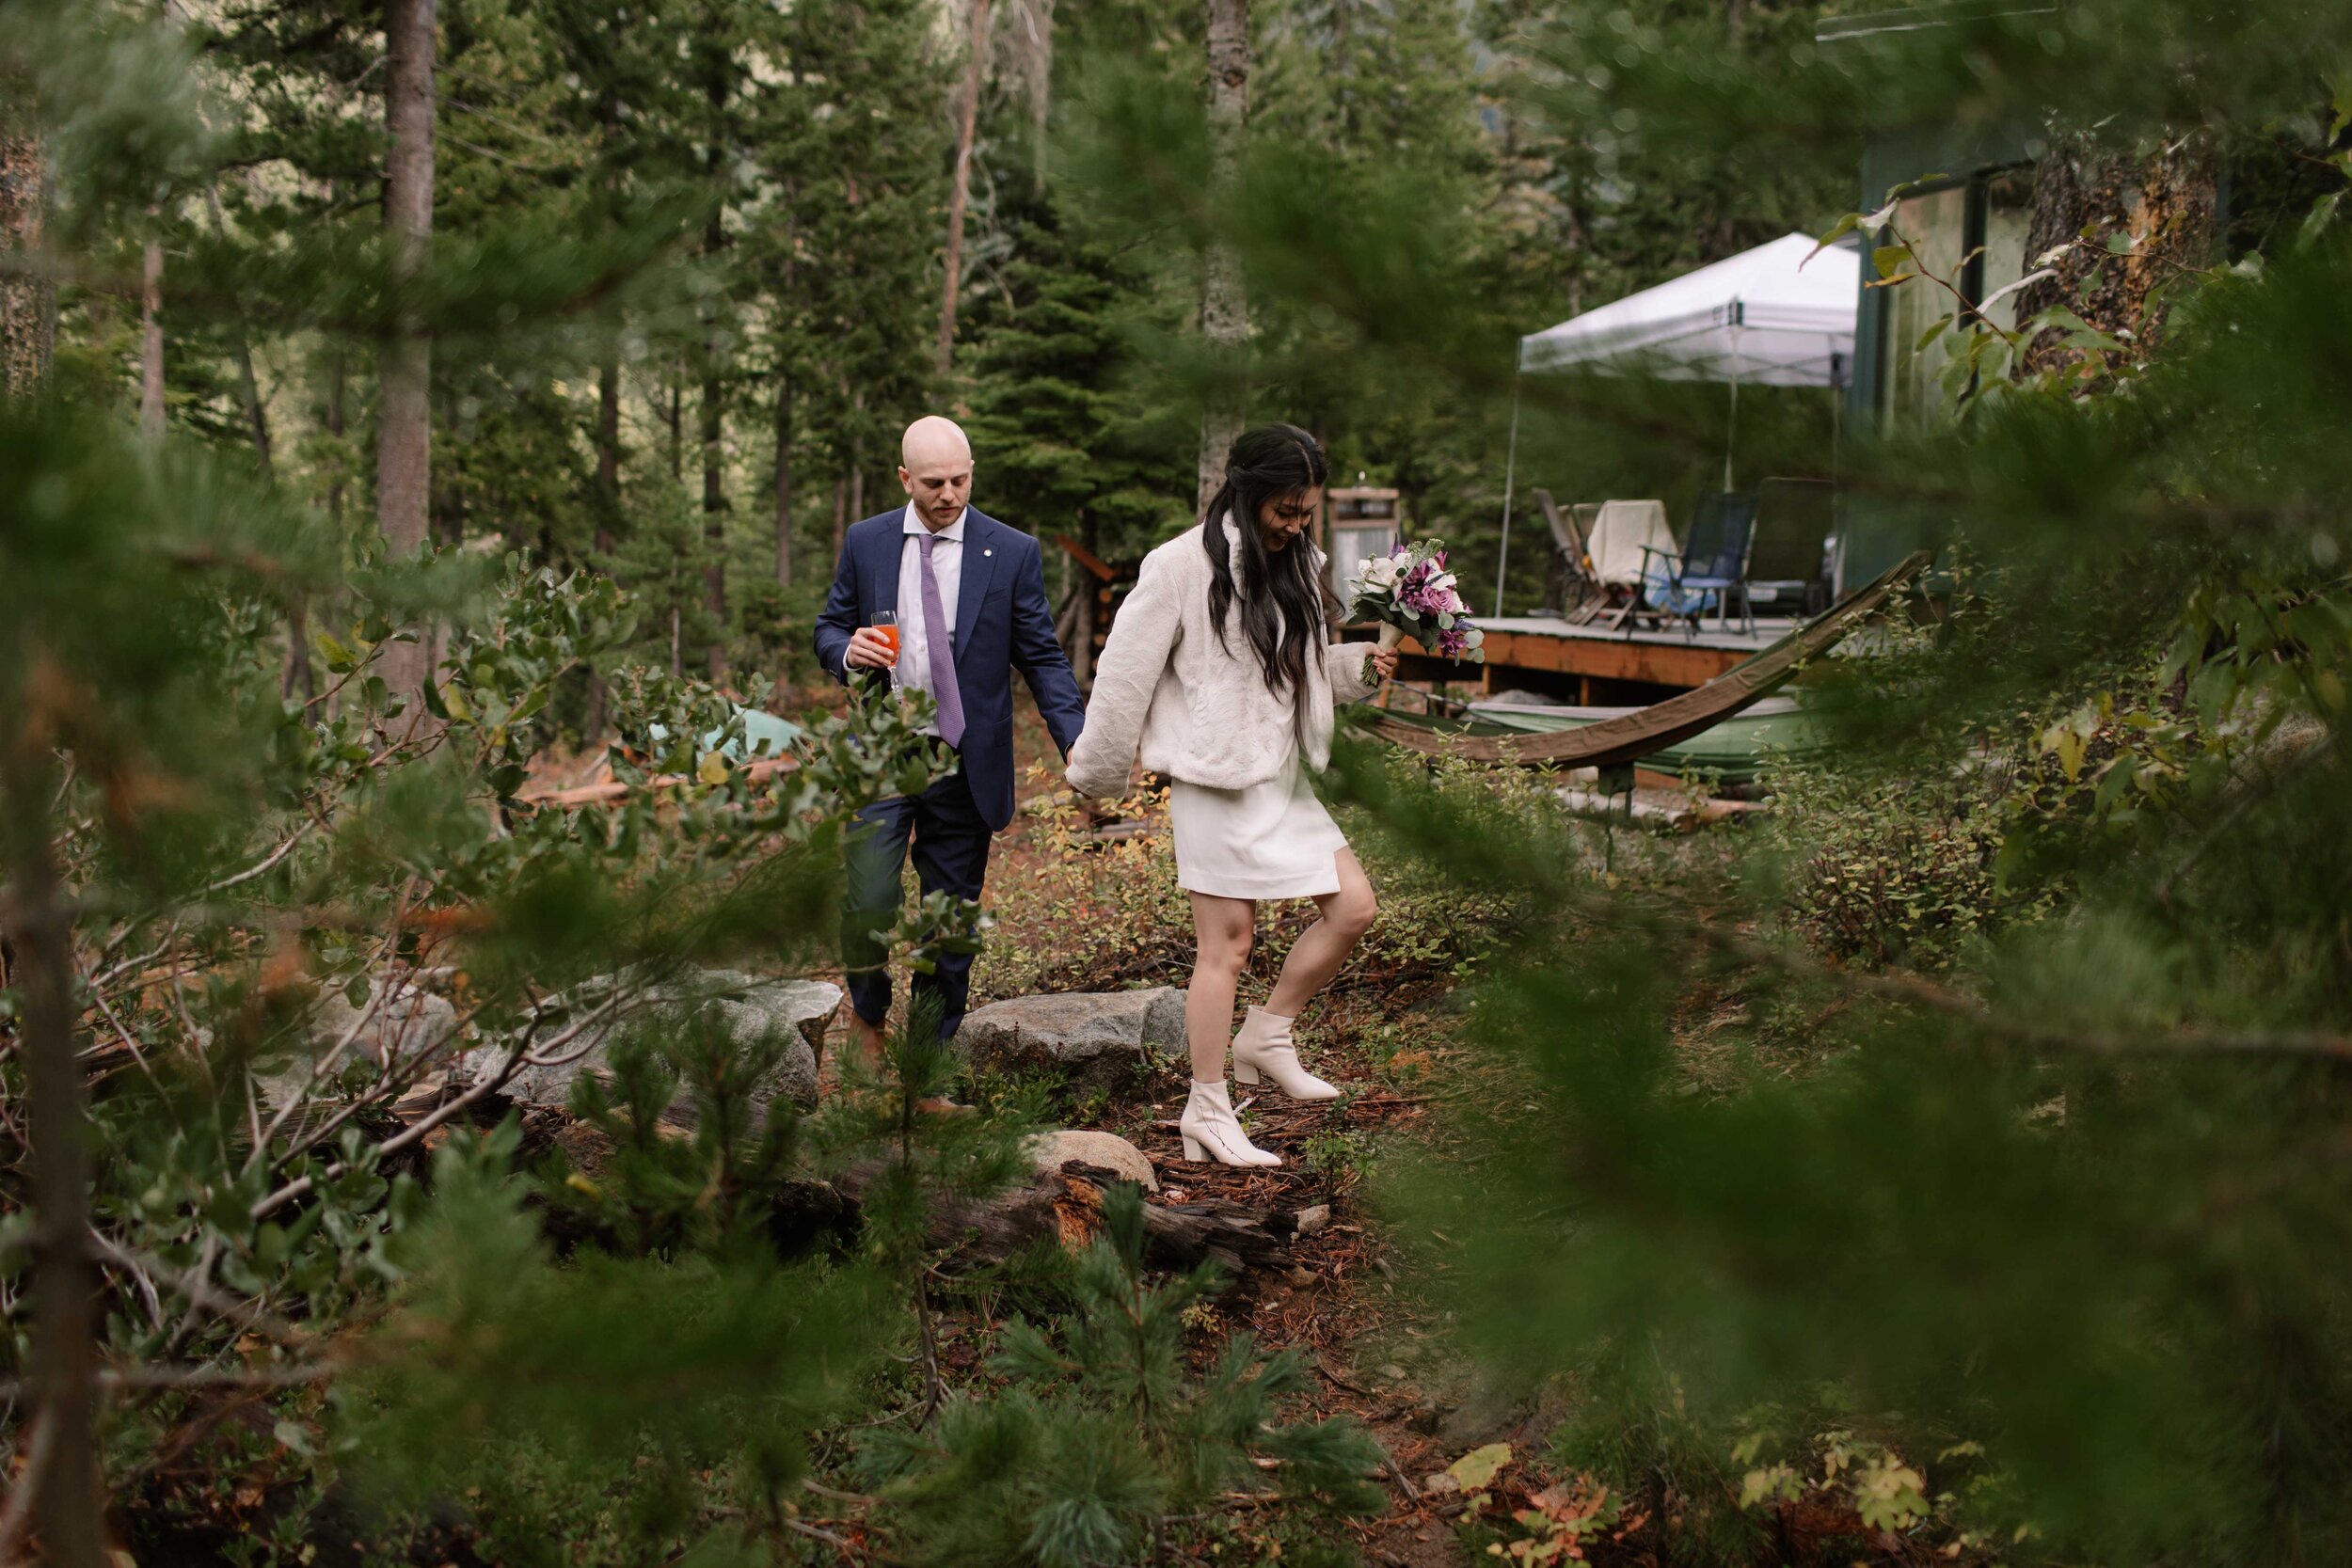 socal-san-diego-southern-california-elopement-small-wedding-outdoor-forest-mountains-waterfall-ceremony-leavenworth-washington-photographer-62.jpg